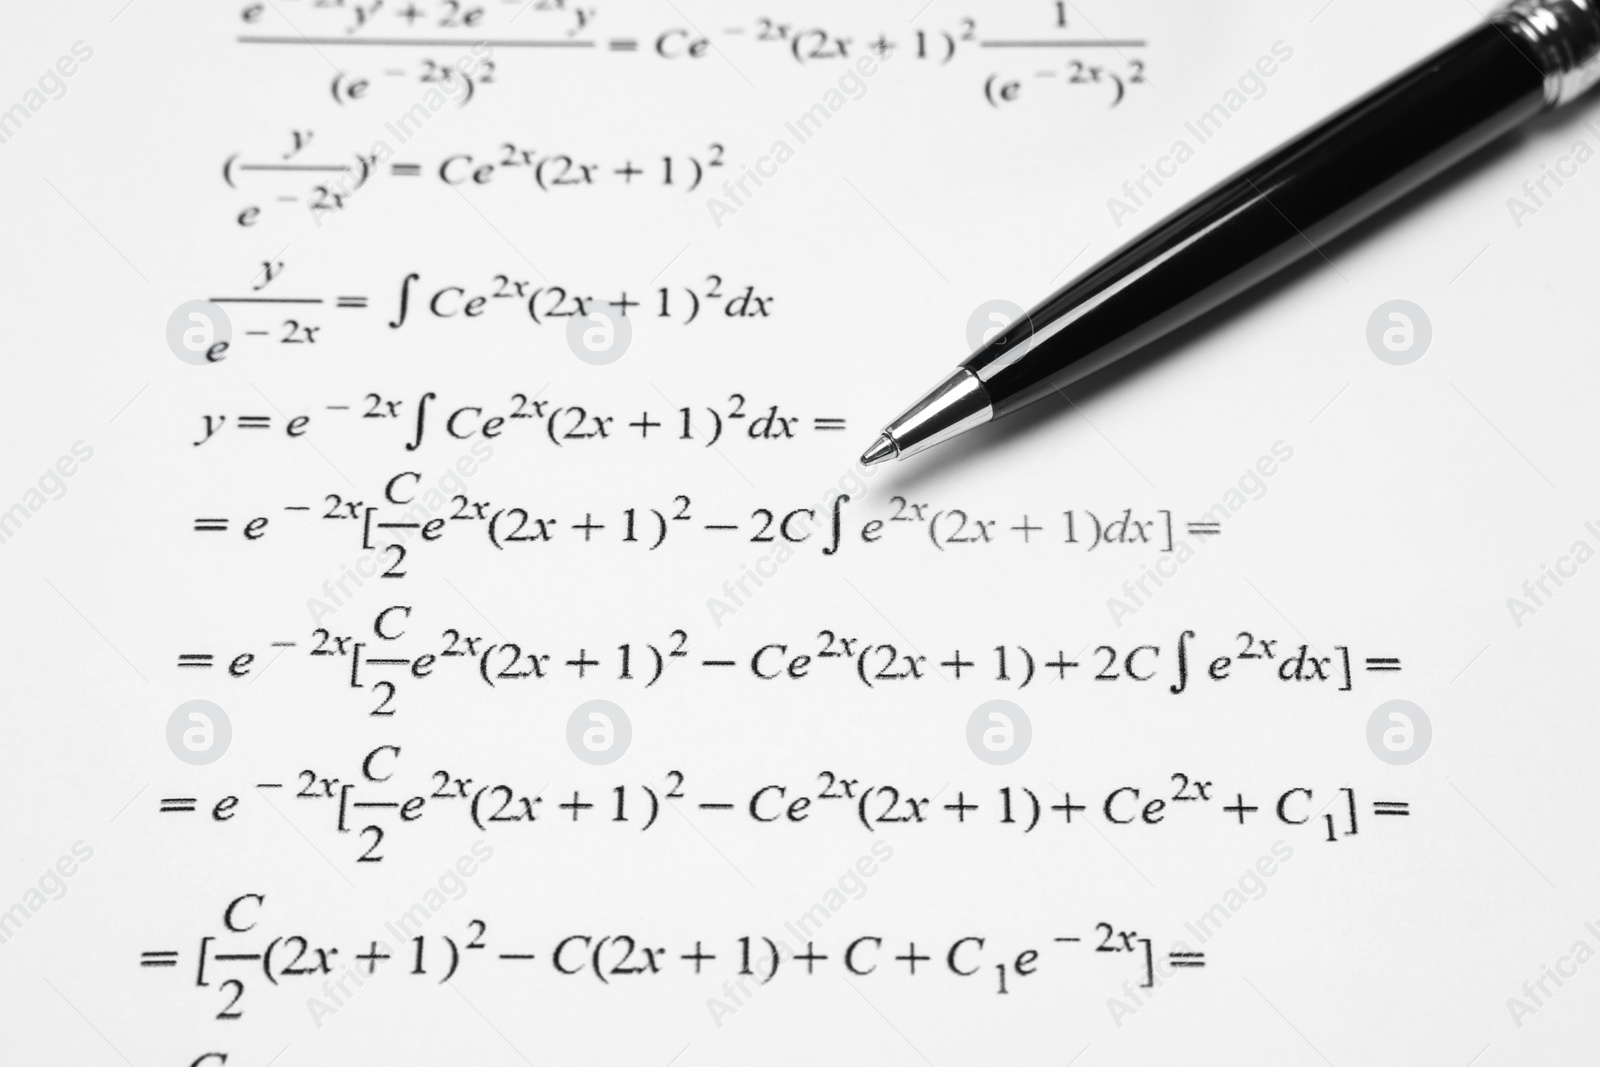 Photo of Sheet of paper with mathematical formulas and pen, closeup